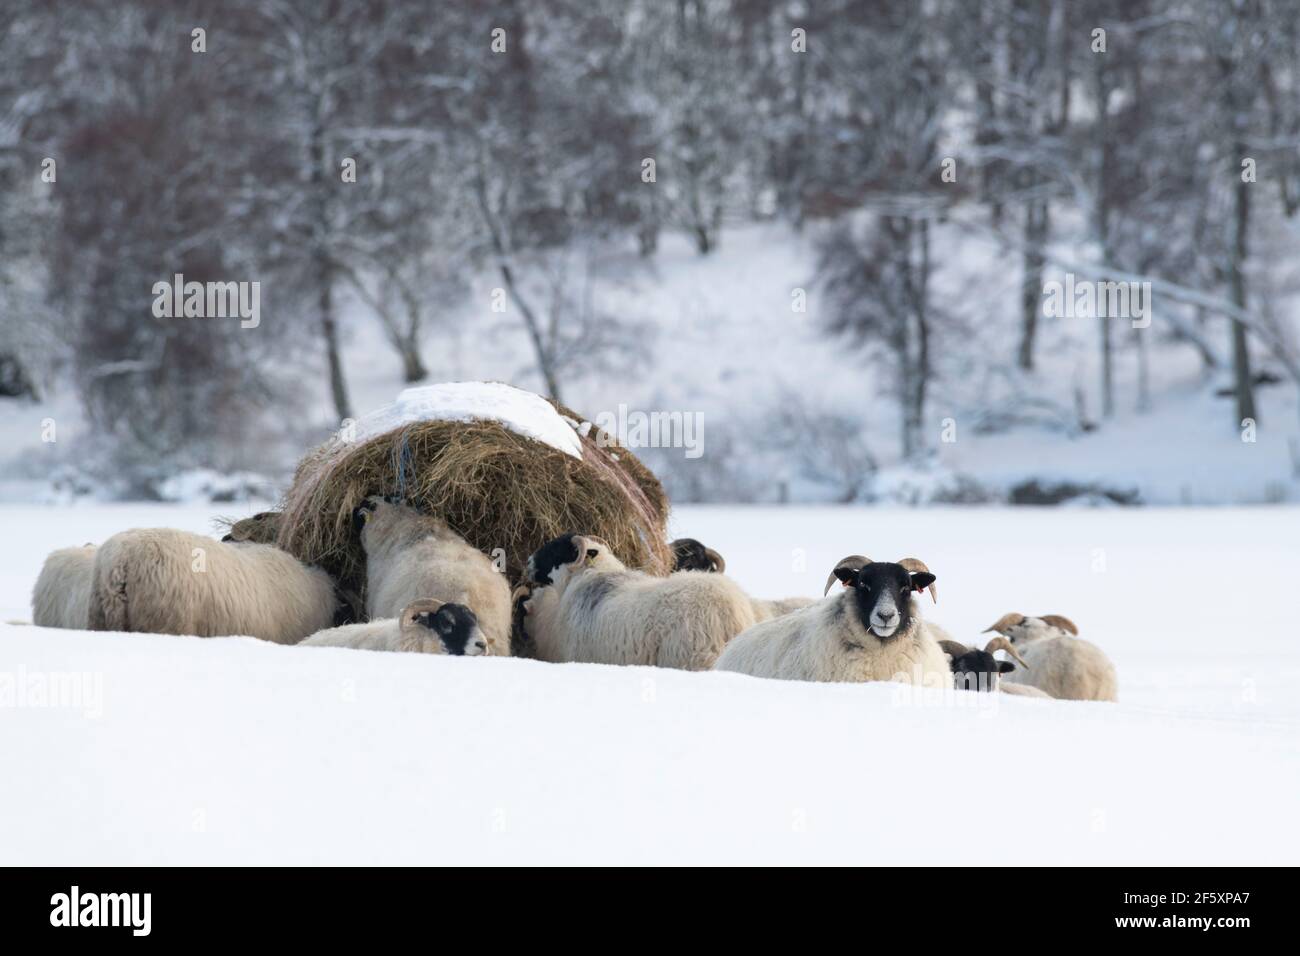 Scottish Blackface Sheep Feeding From a Bale of Hay in a Ring Feeder in a Snowy Winter Landscape Stock Photo